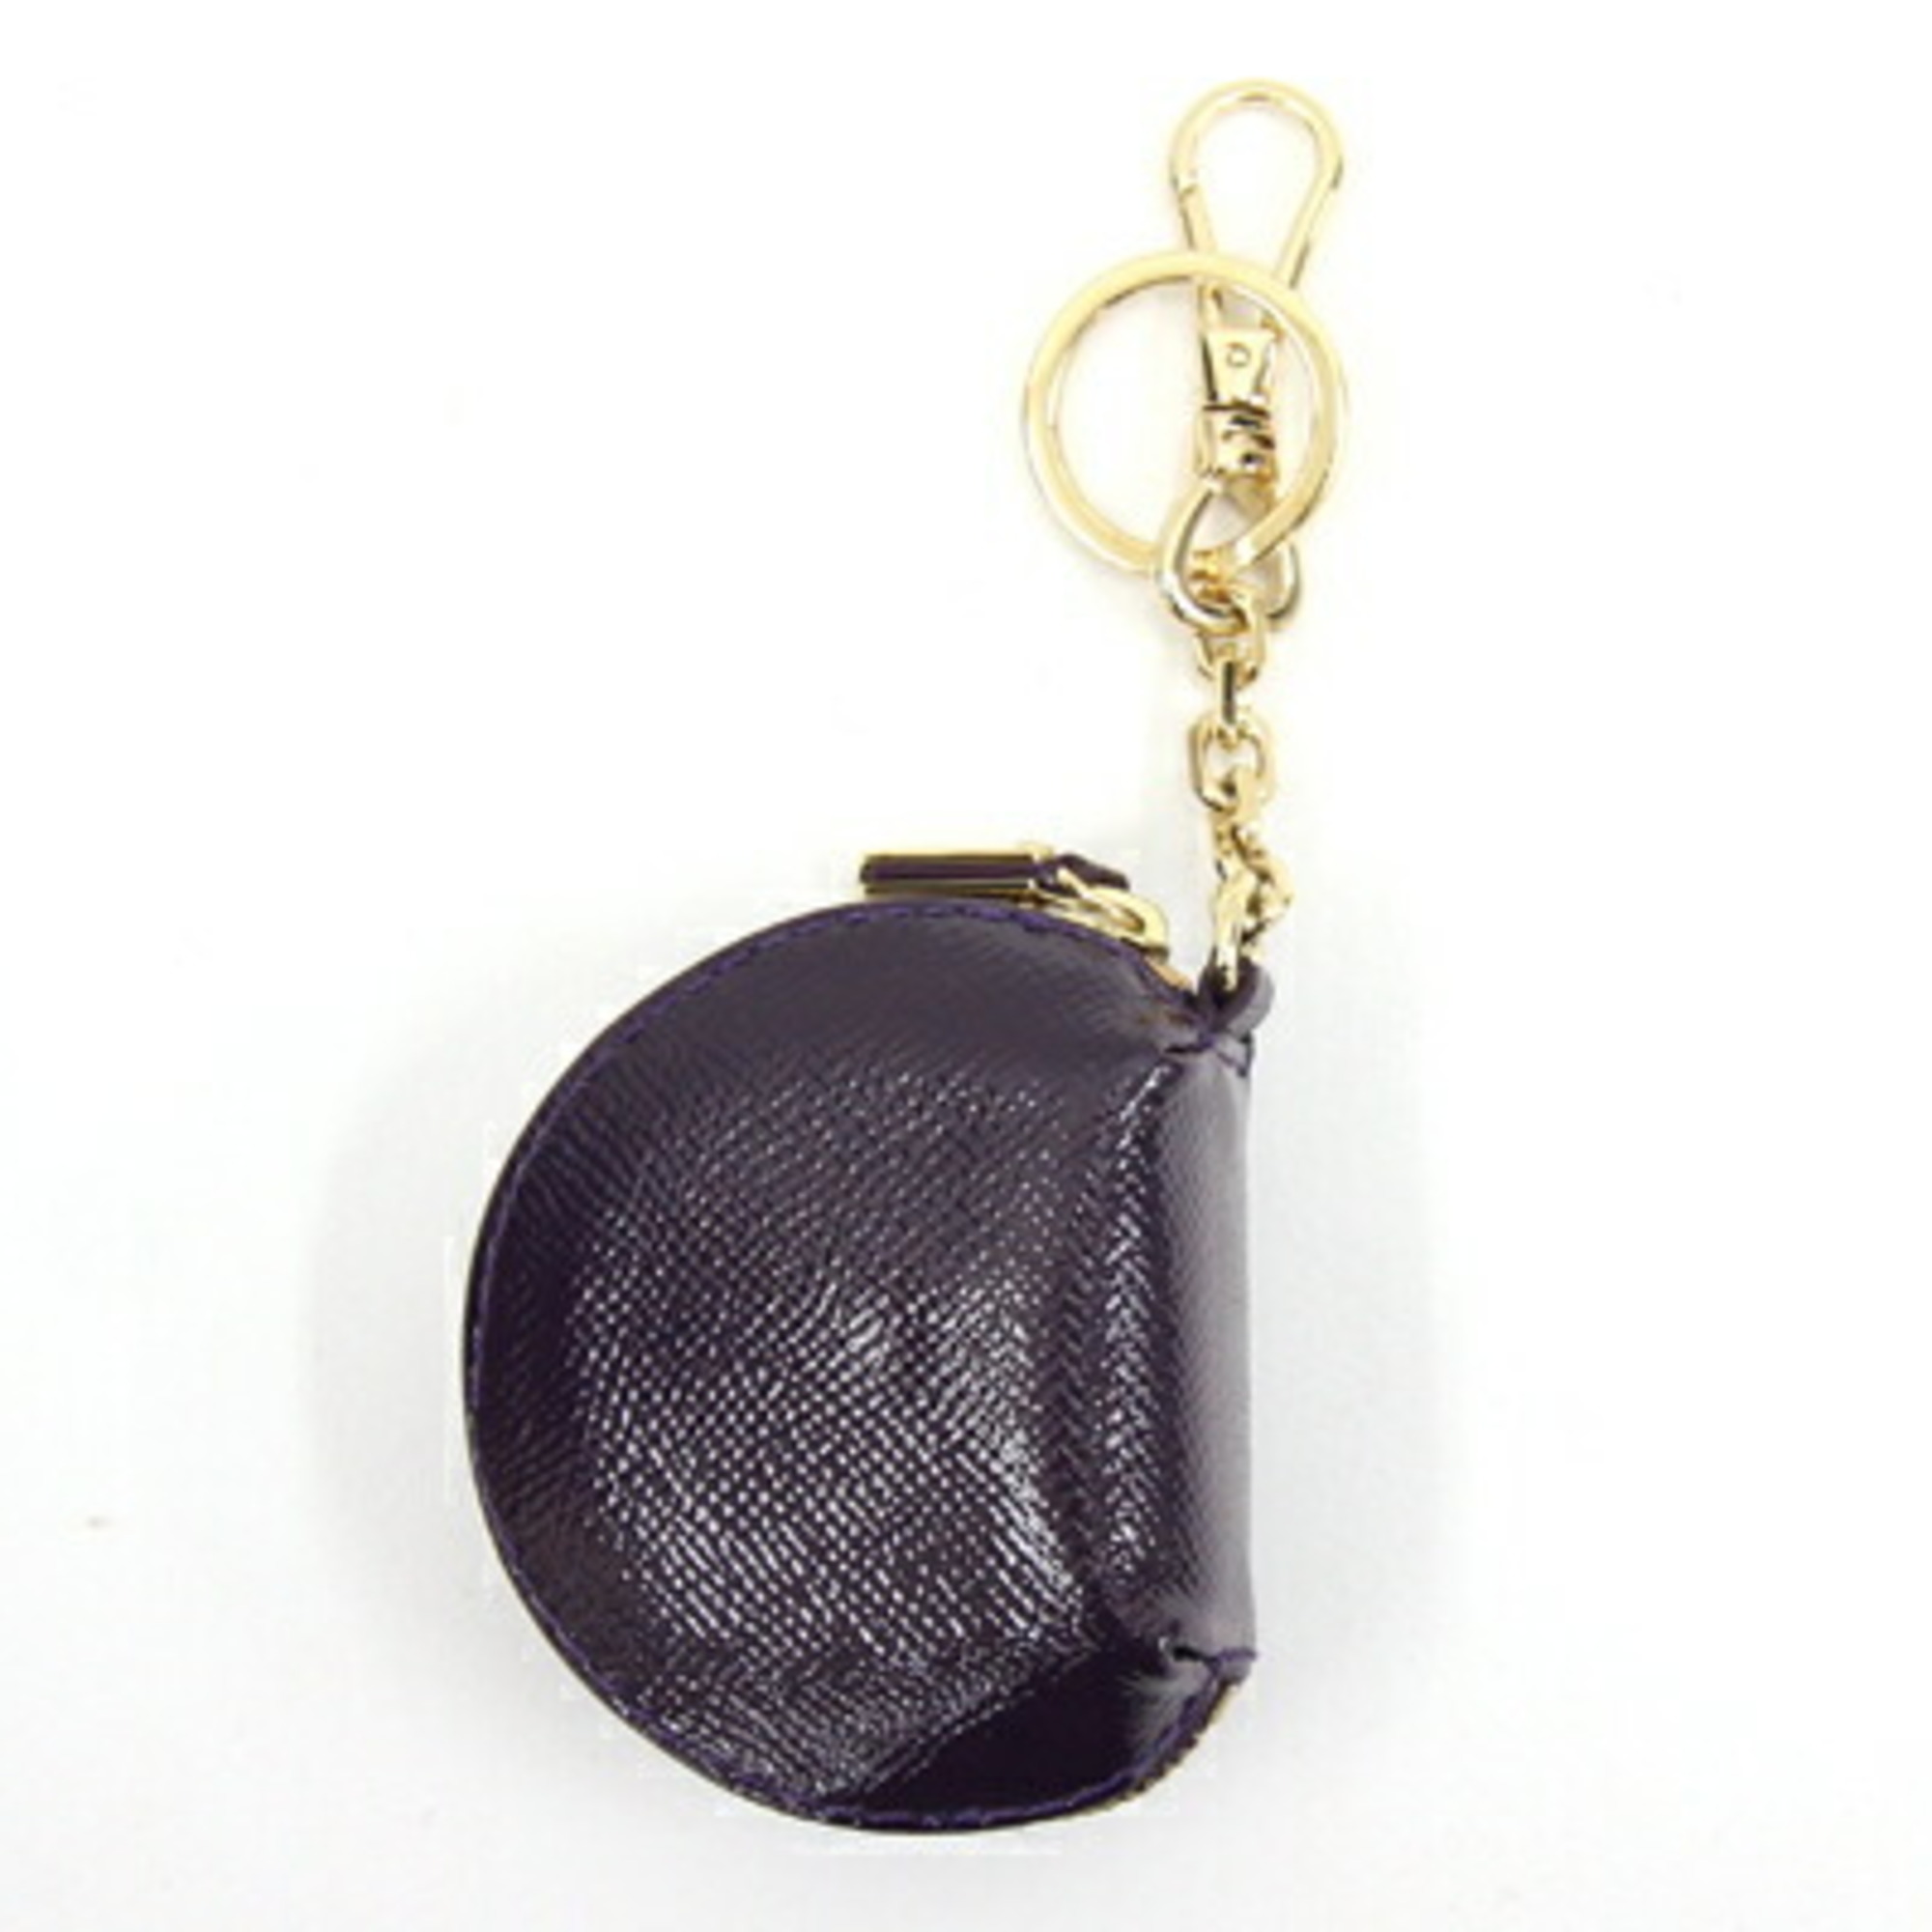 Burberry Coin Case 3947367 Purple Leather Bag Charm Pouch Purse Key Hook BURBERRY